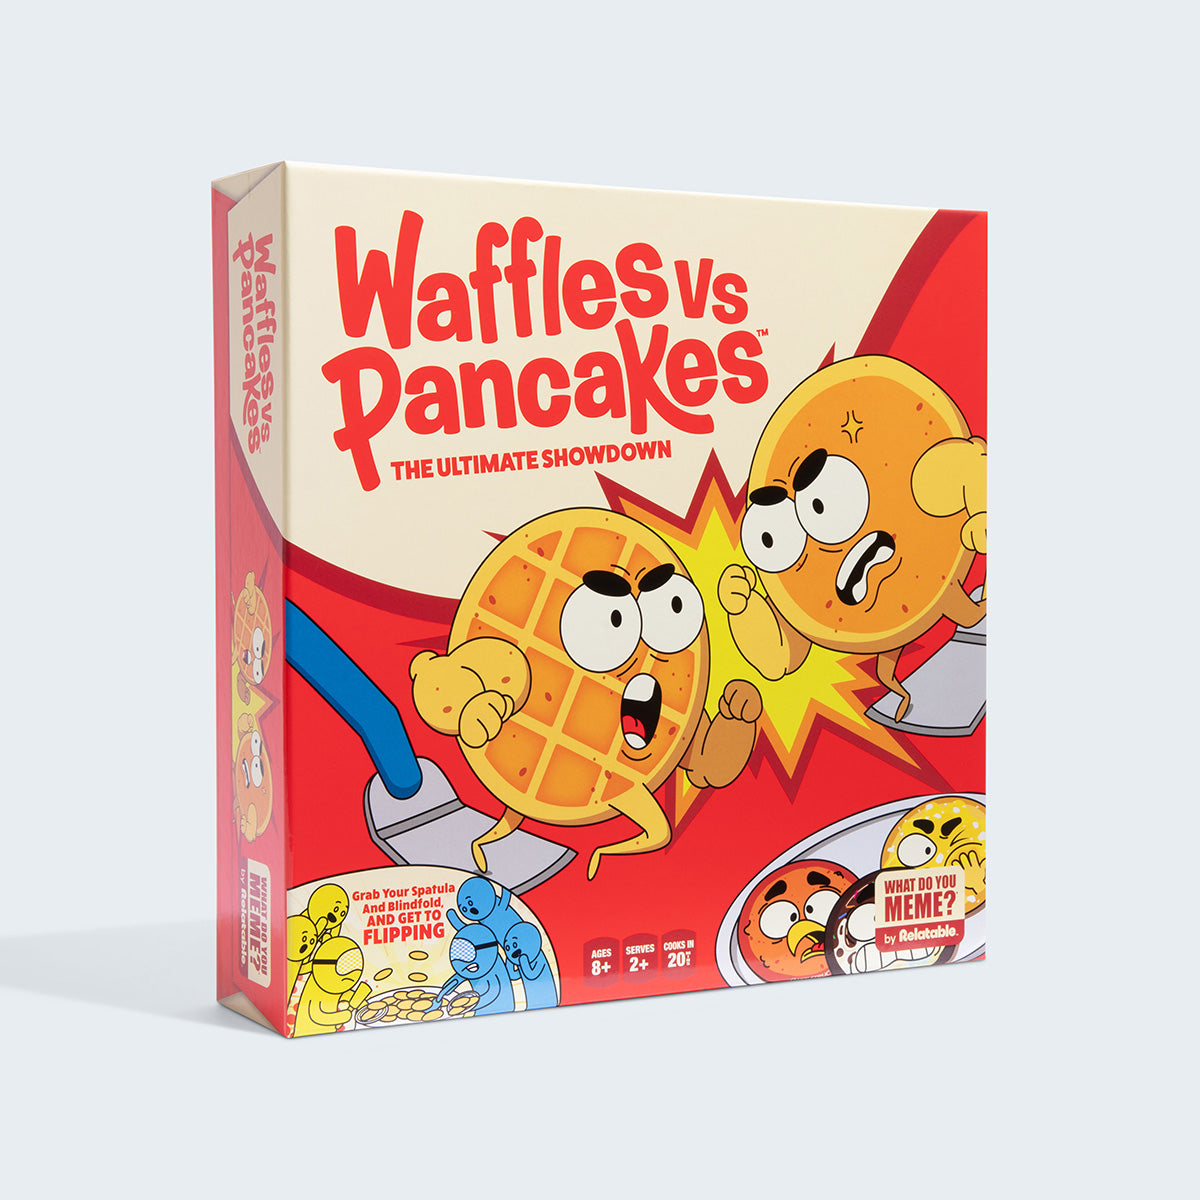 Waffles vs Pancakes - The Breakfast Scoop Up Game for Families